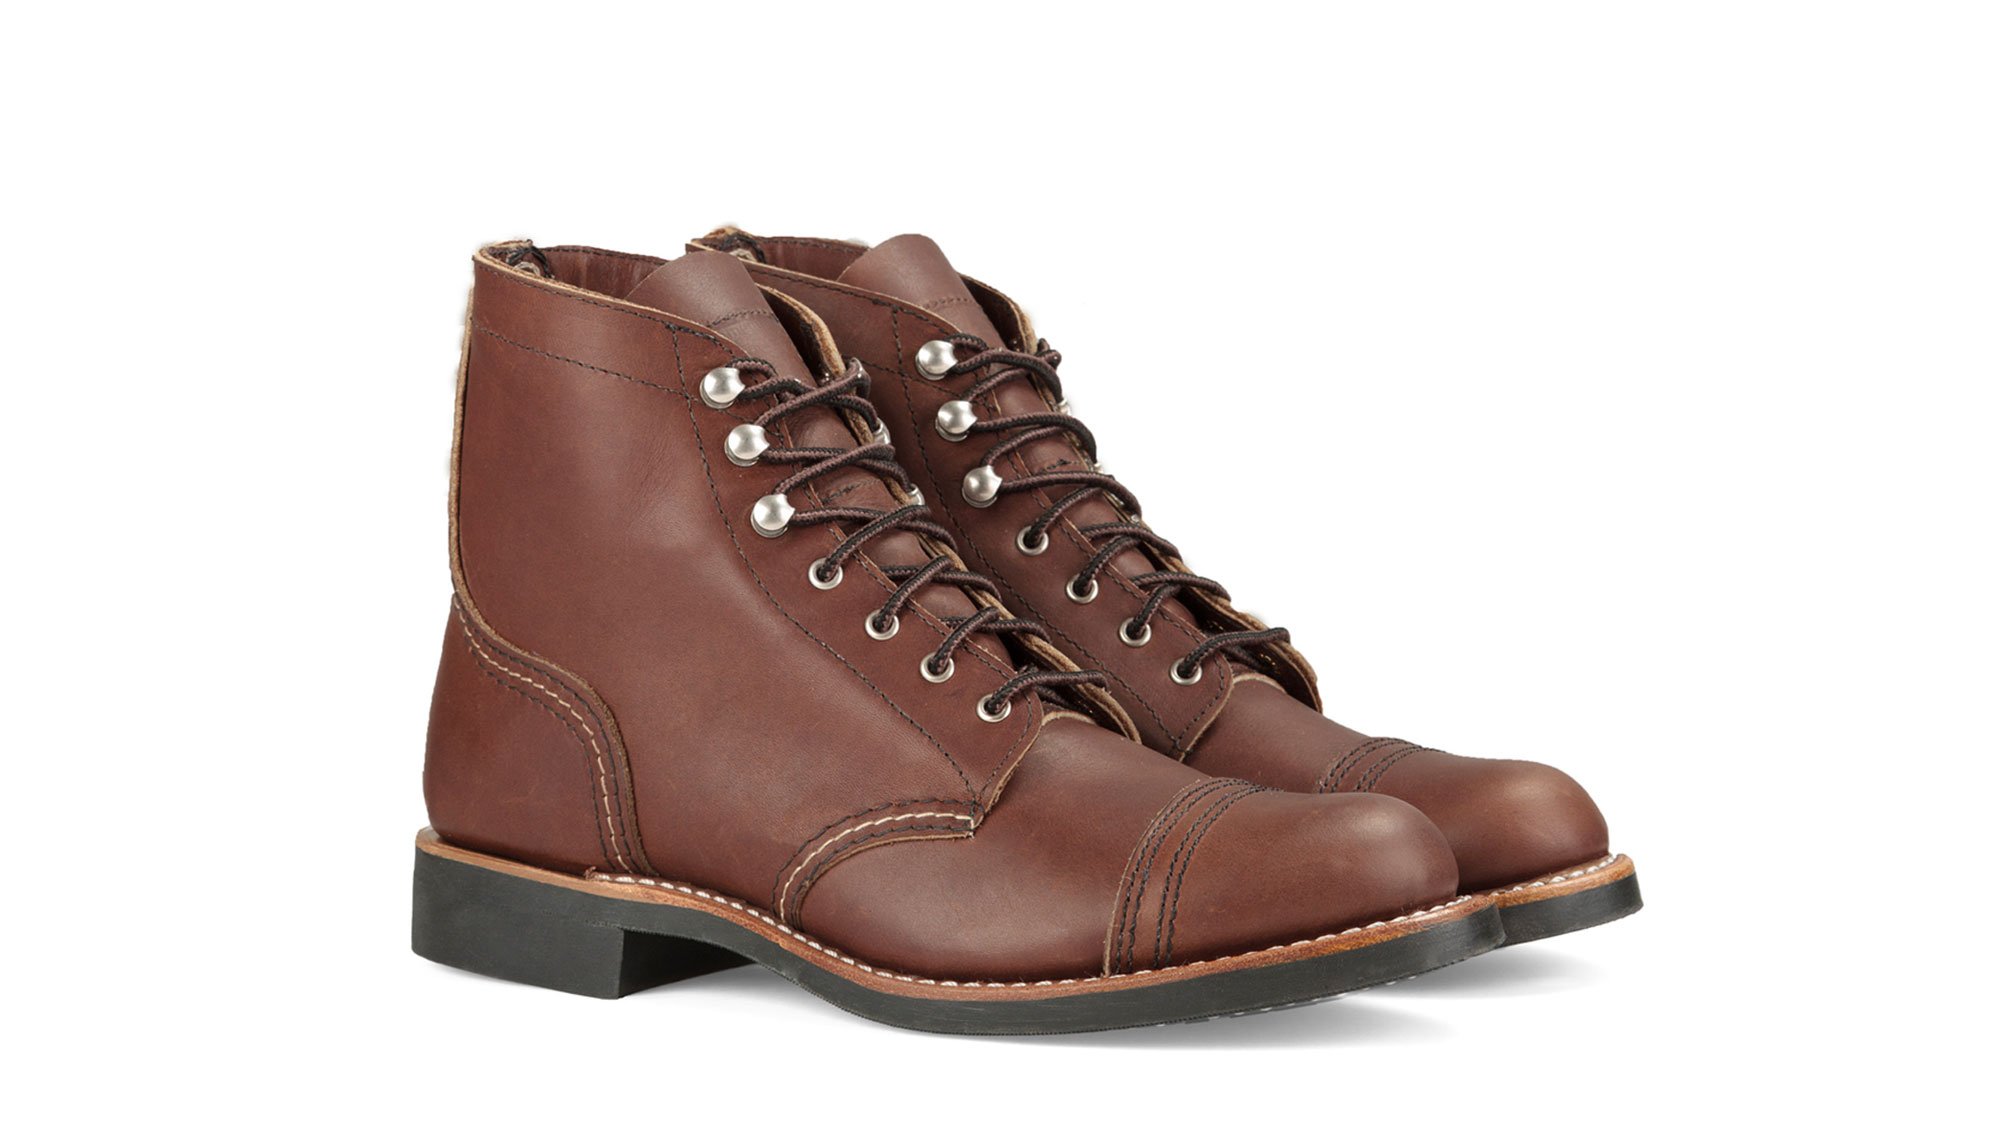 Shop the Short Engineer 3354 | Official Red Wing Shoes Online Store